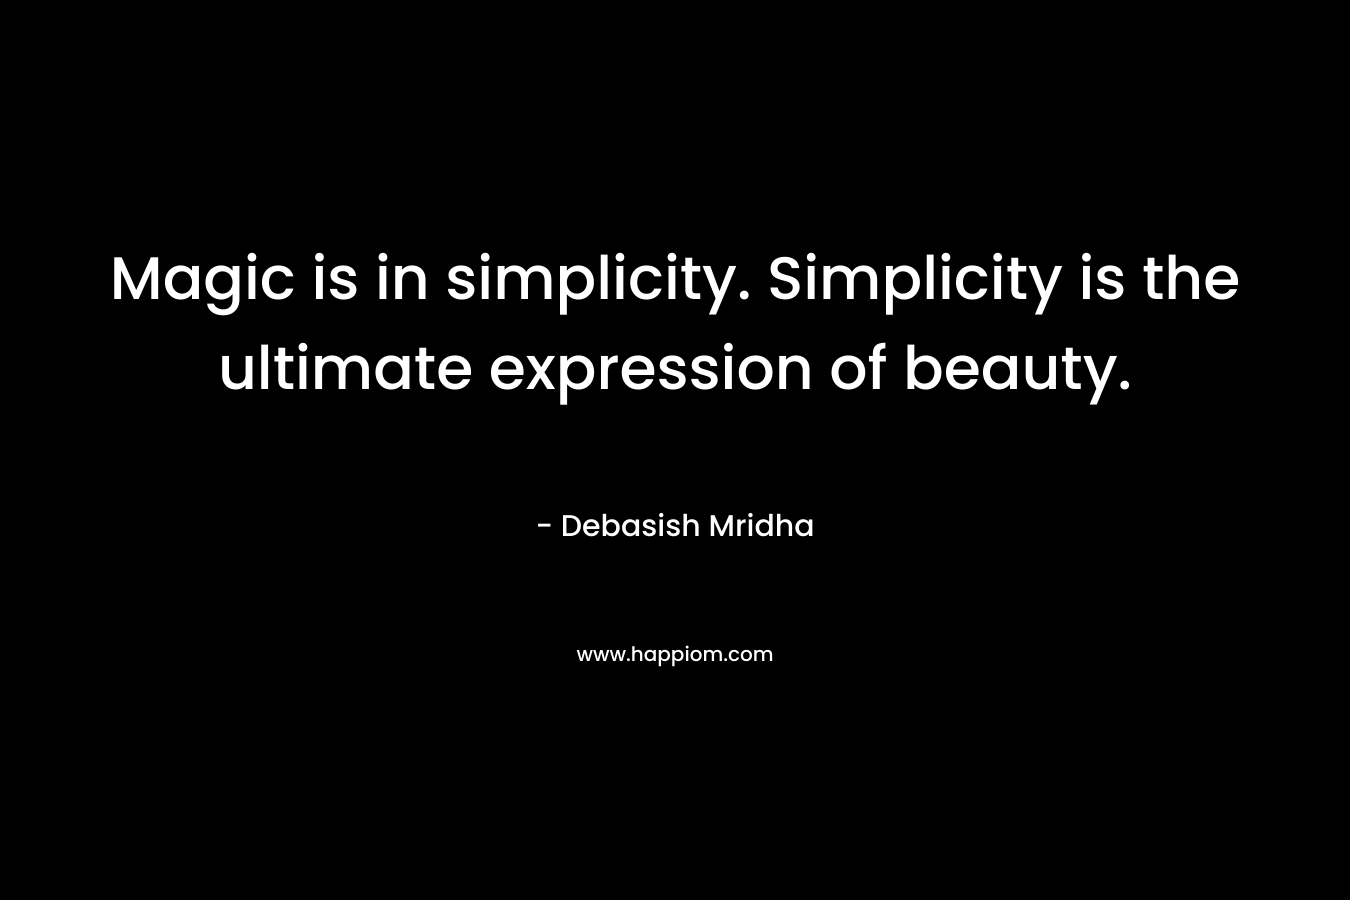 Magic is in simplicity. Simplicity is the ultimate expression of beauty.